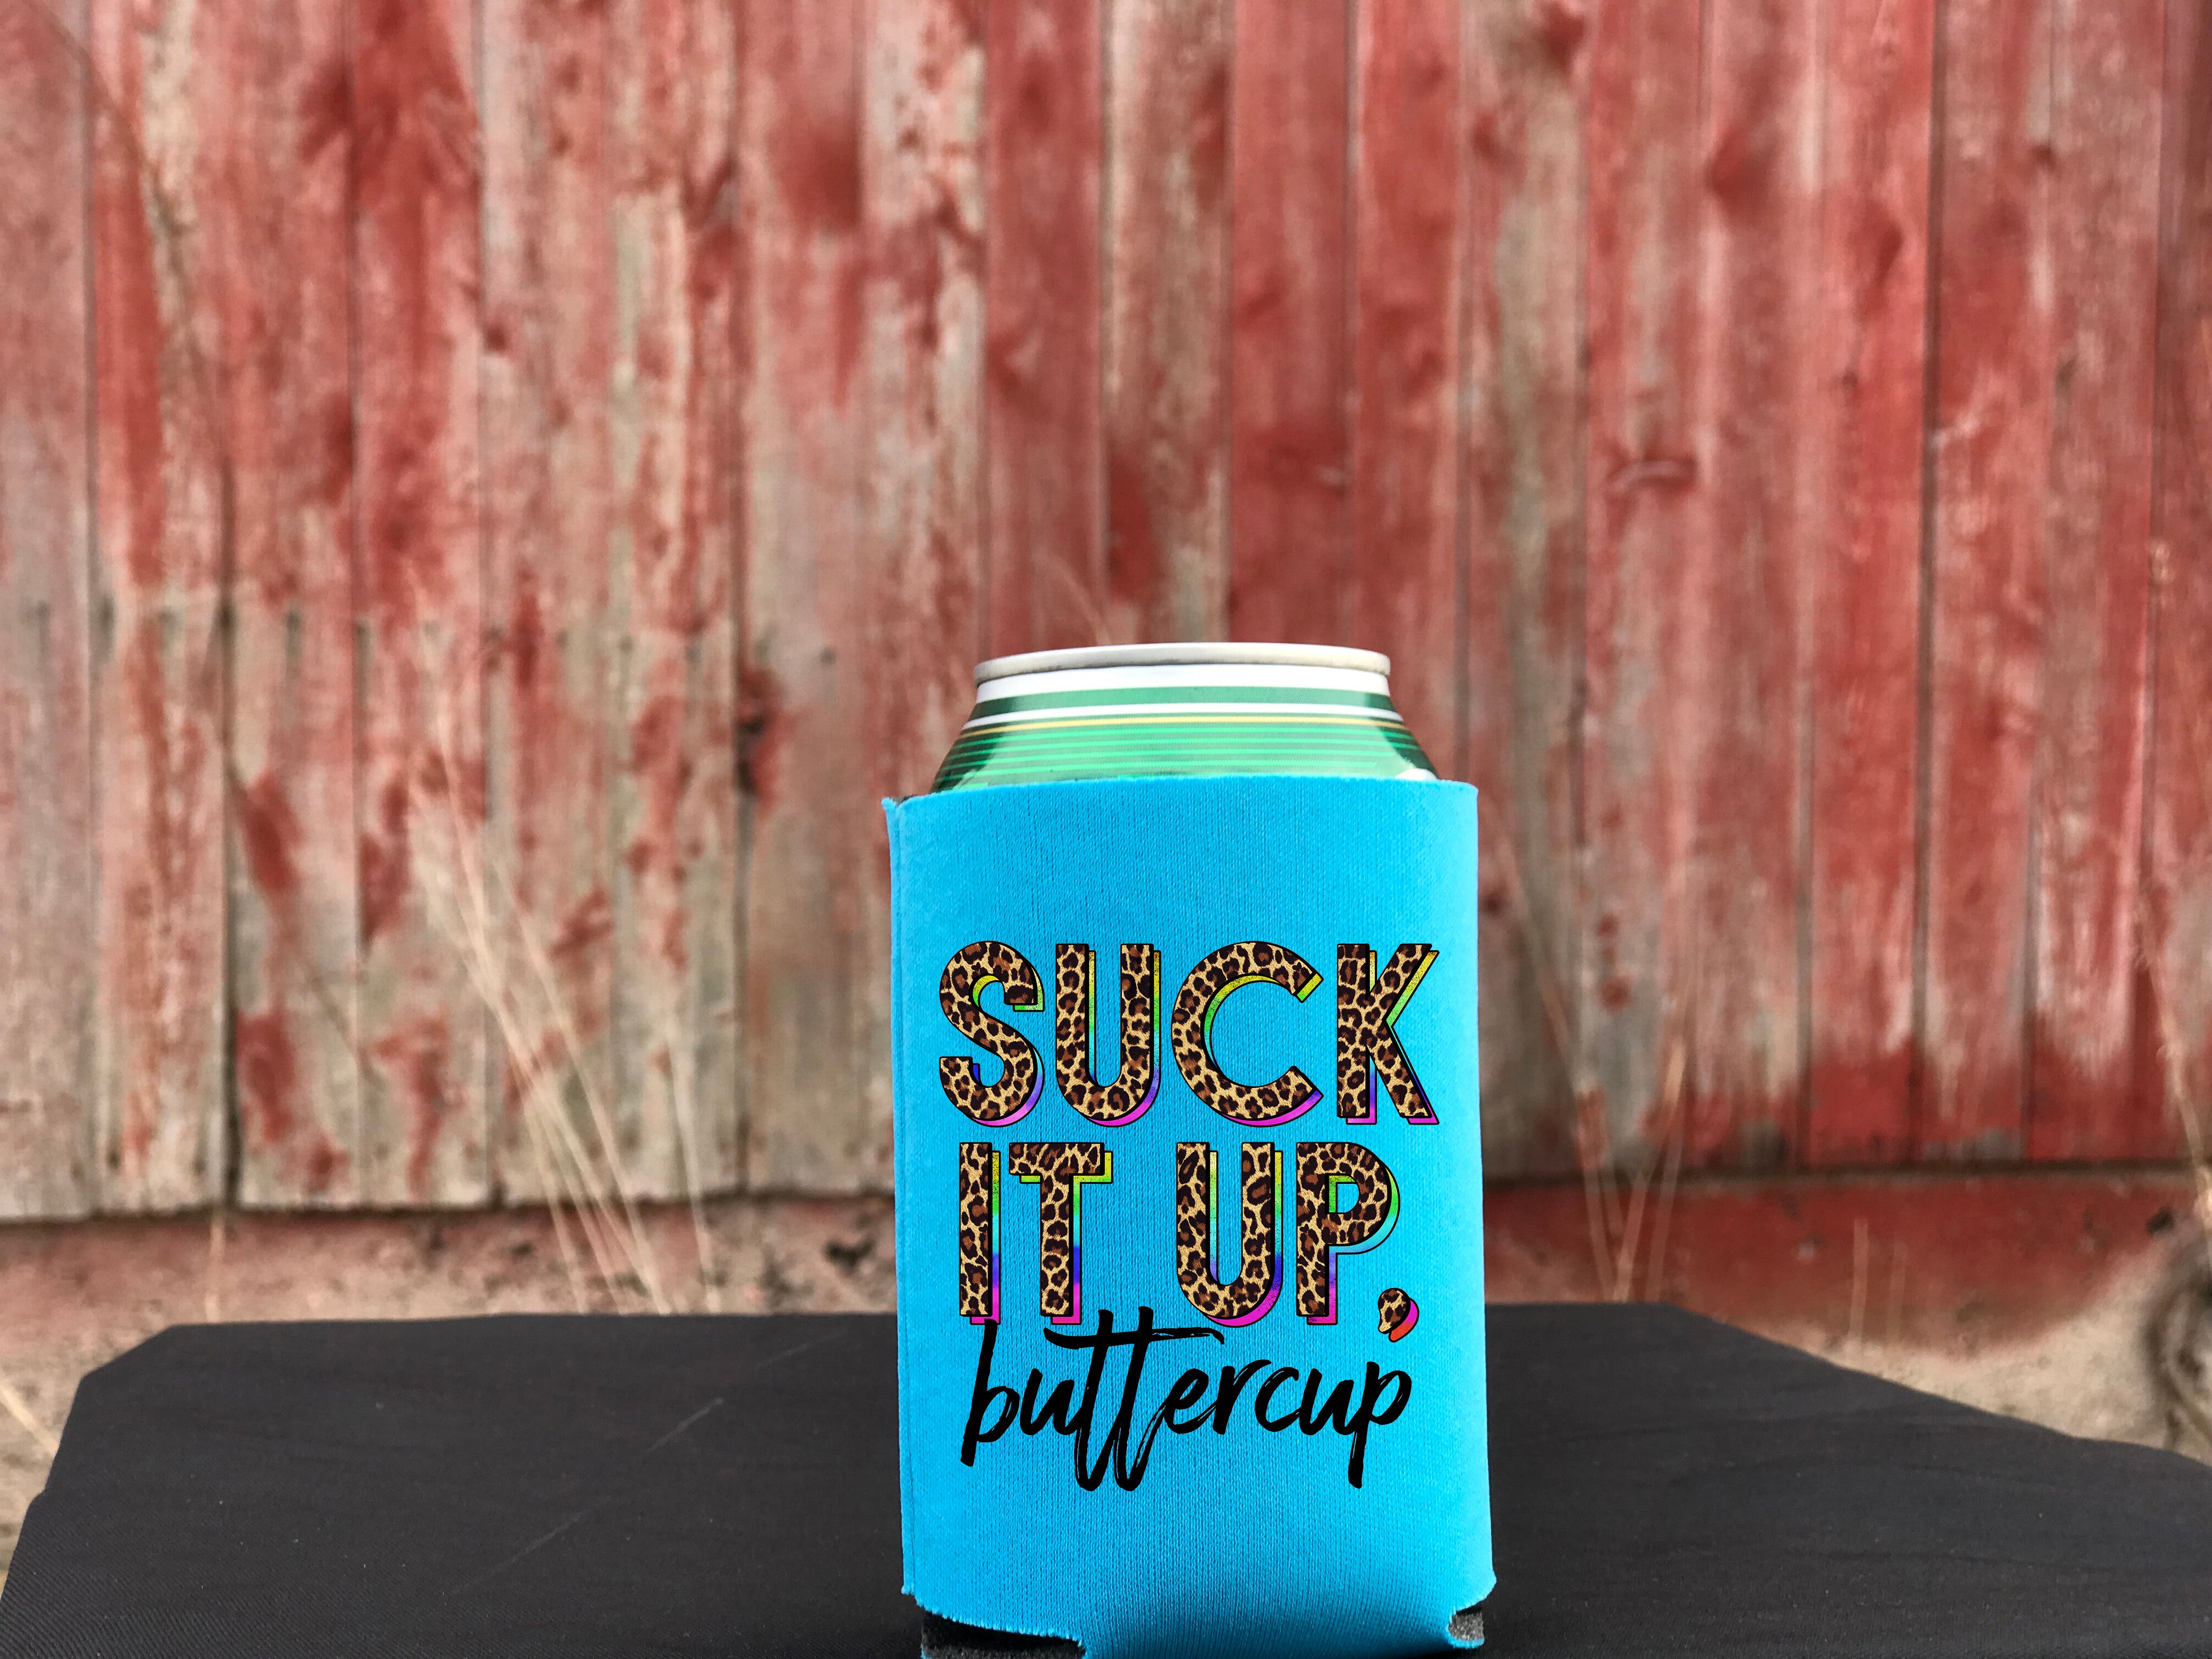 Koozies - Dirty South Fit